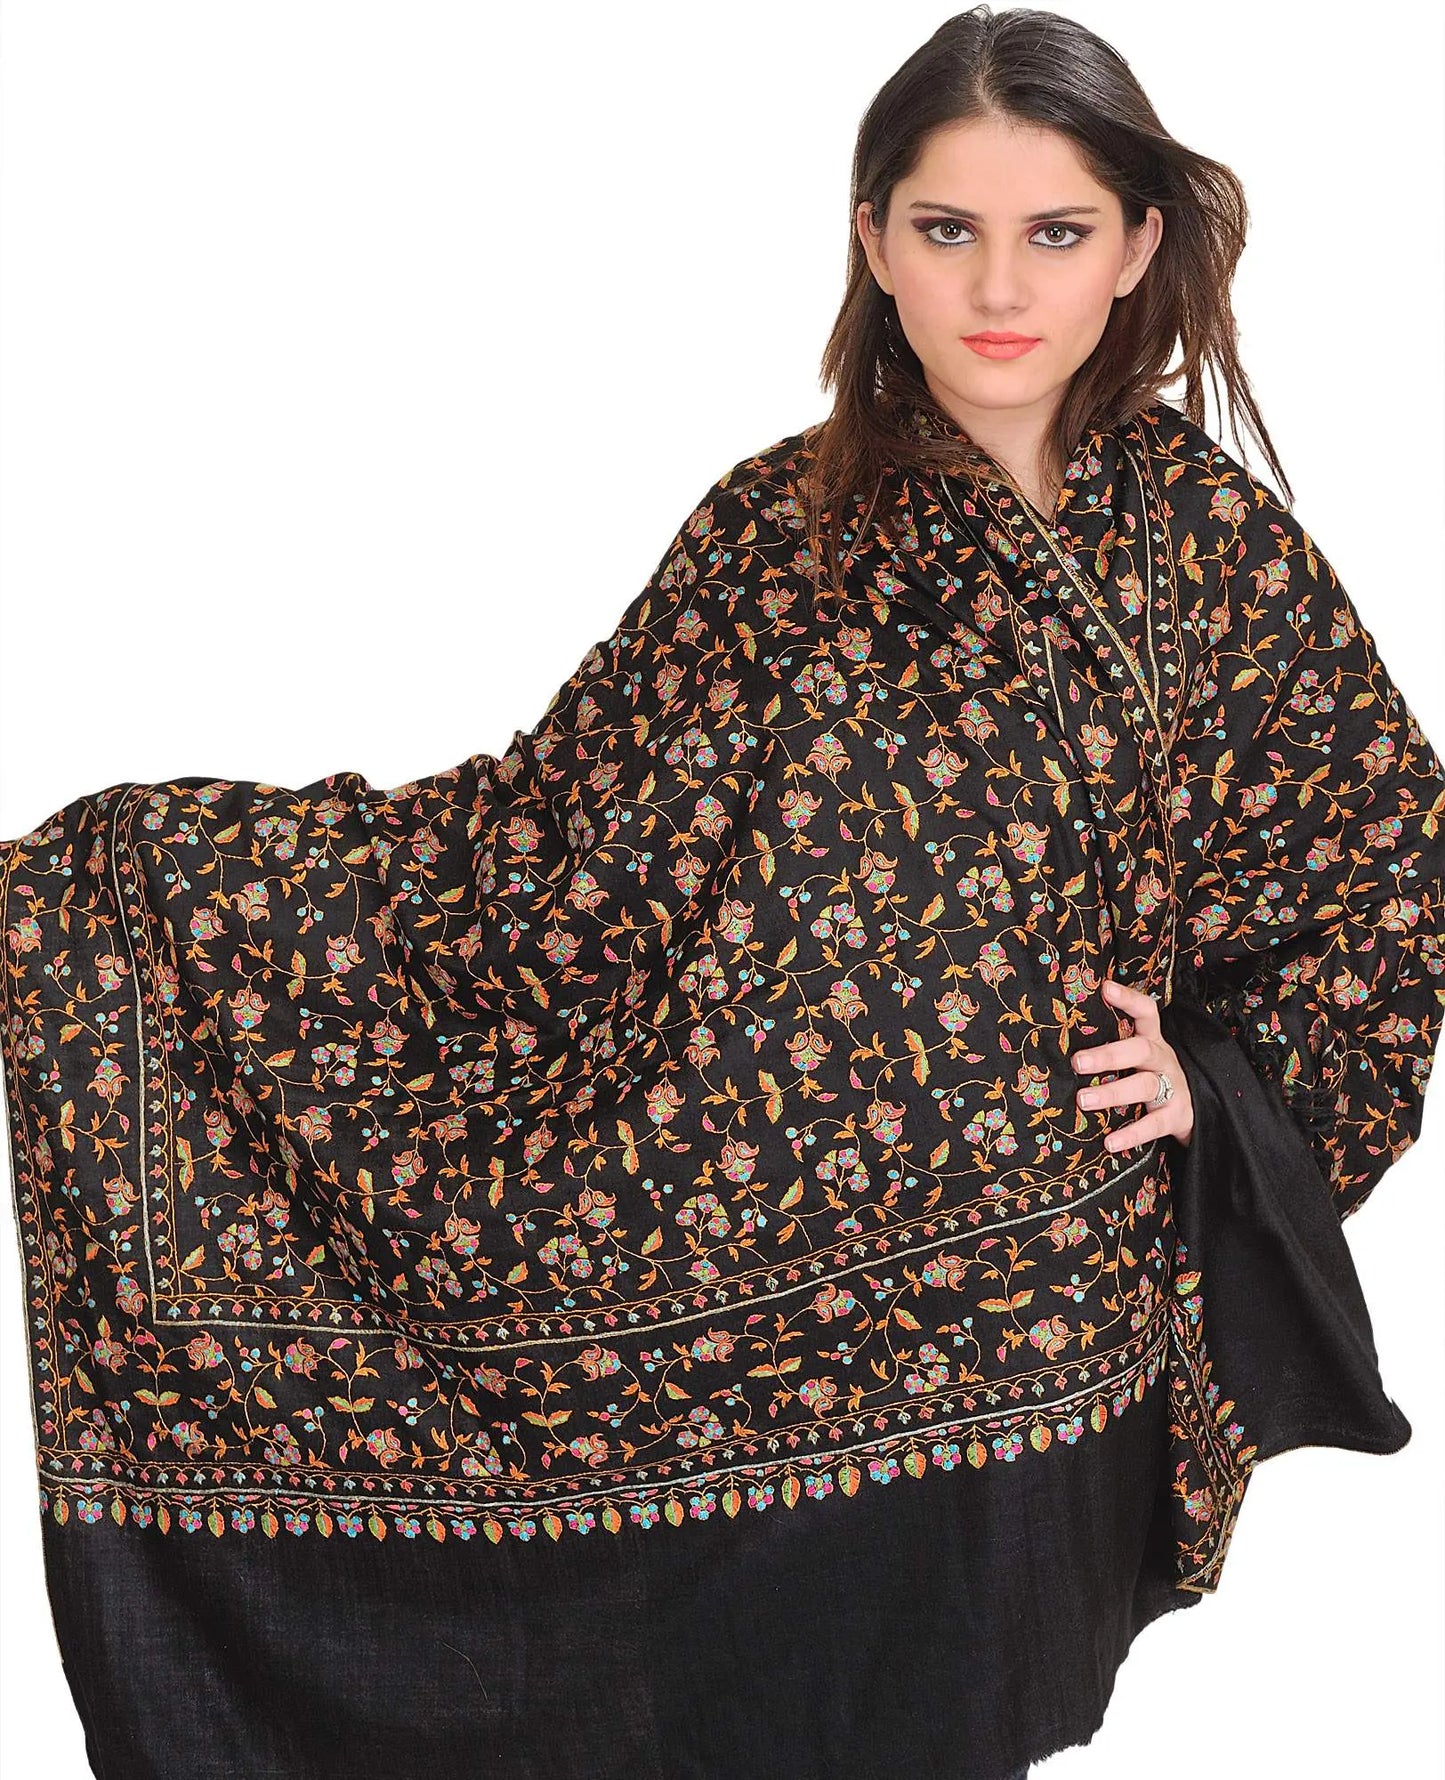 Cream Handloom Pashmina Shawl from Kashmir with Sozni Hand-Embroidery All-Over